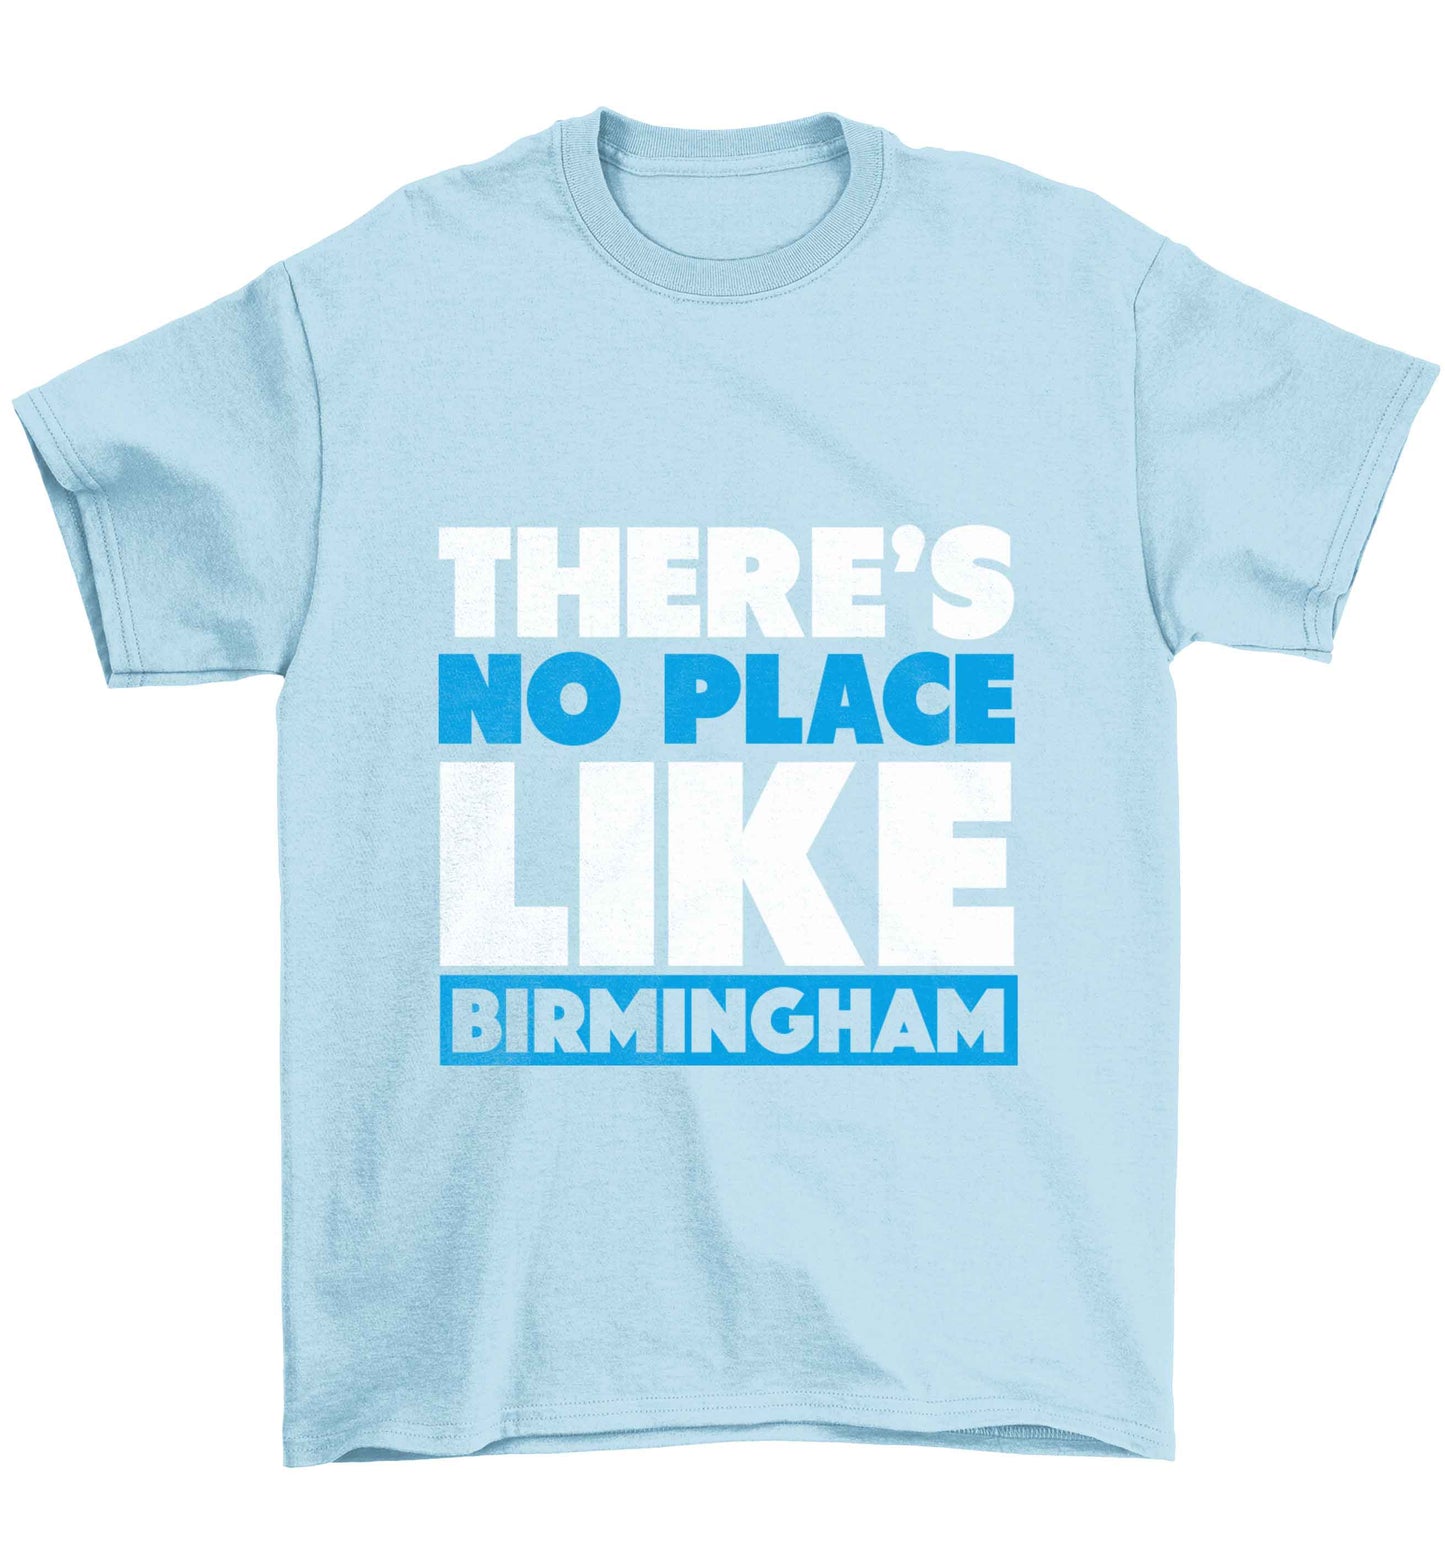 There's no place like Birmingham Children's light blue Tshirt 12-13 Years